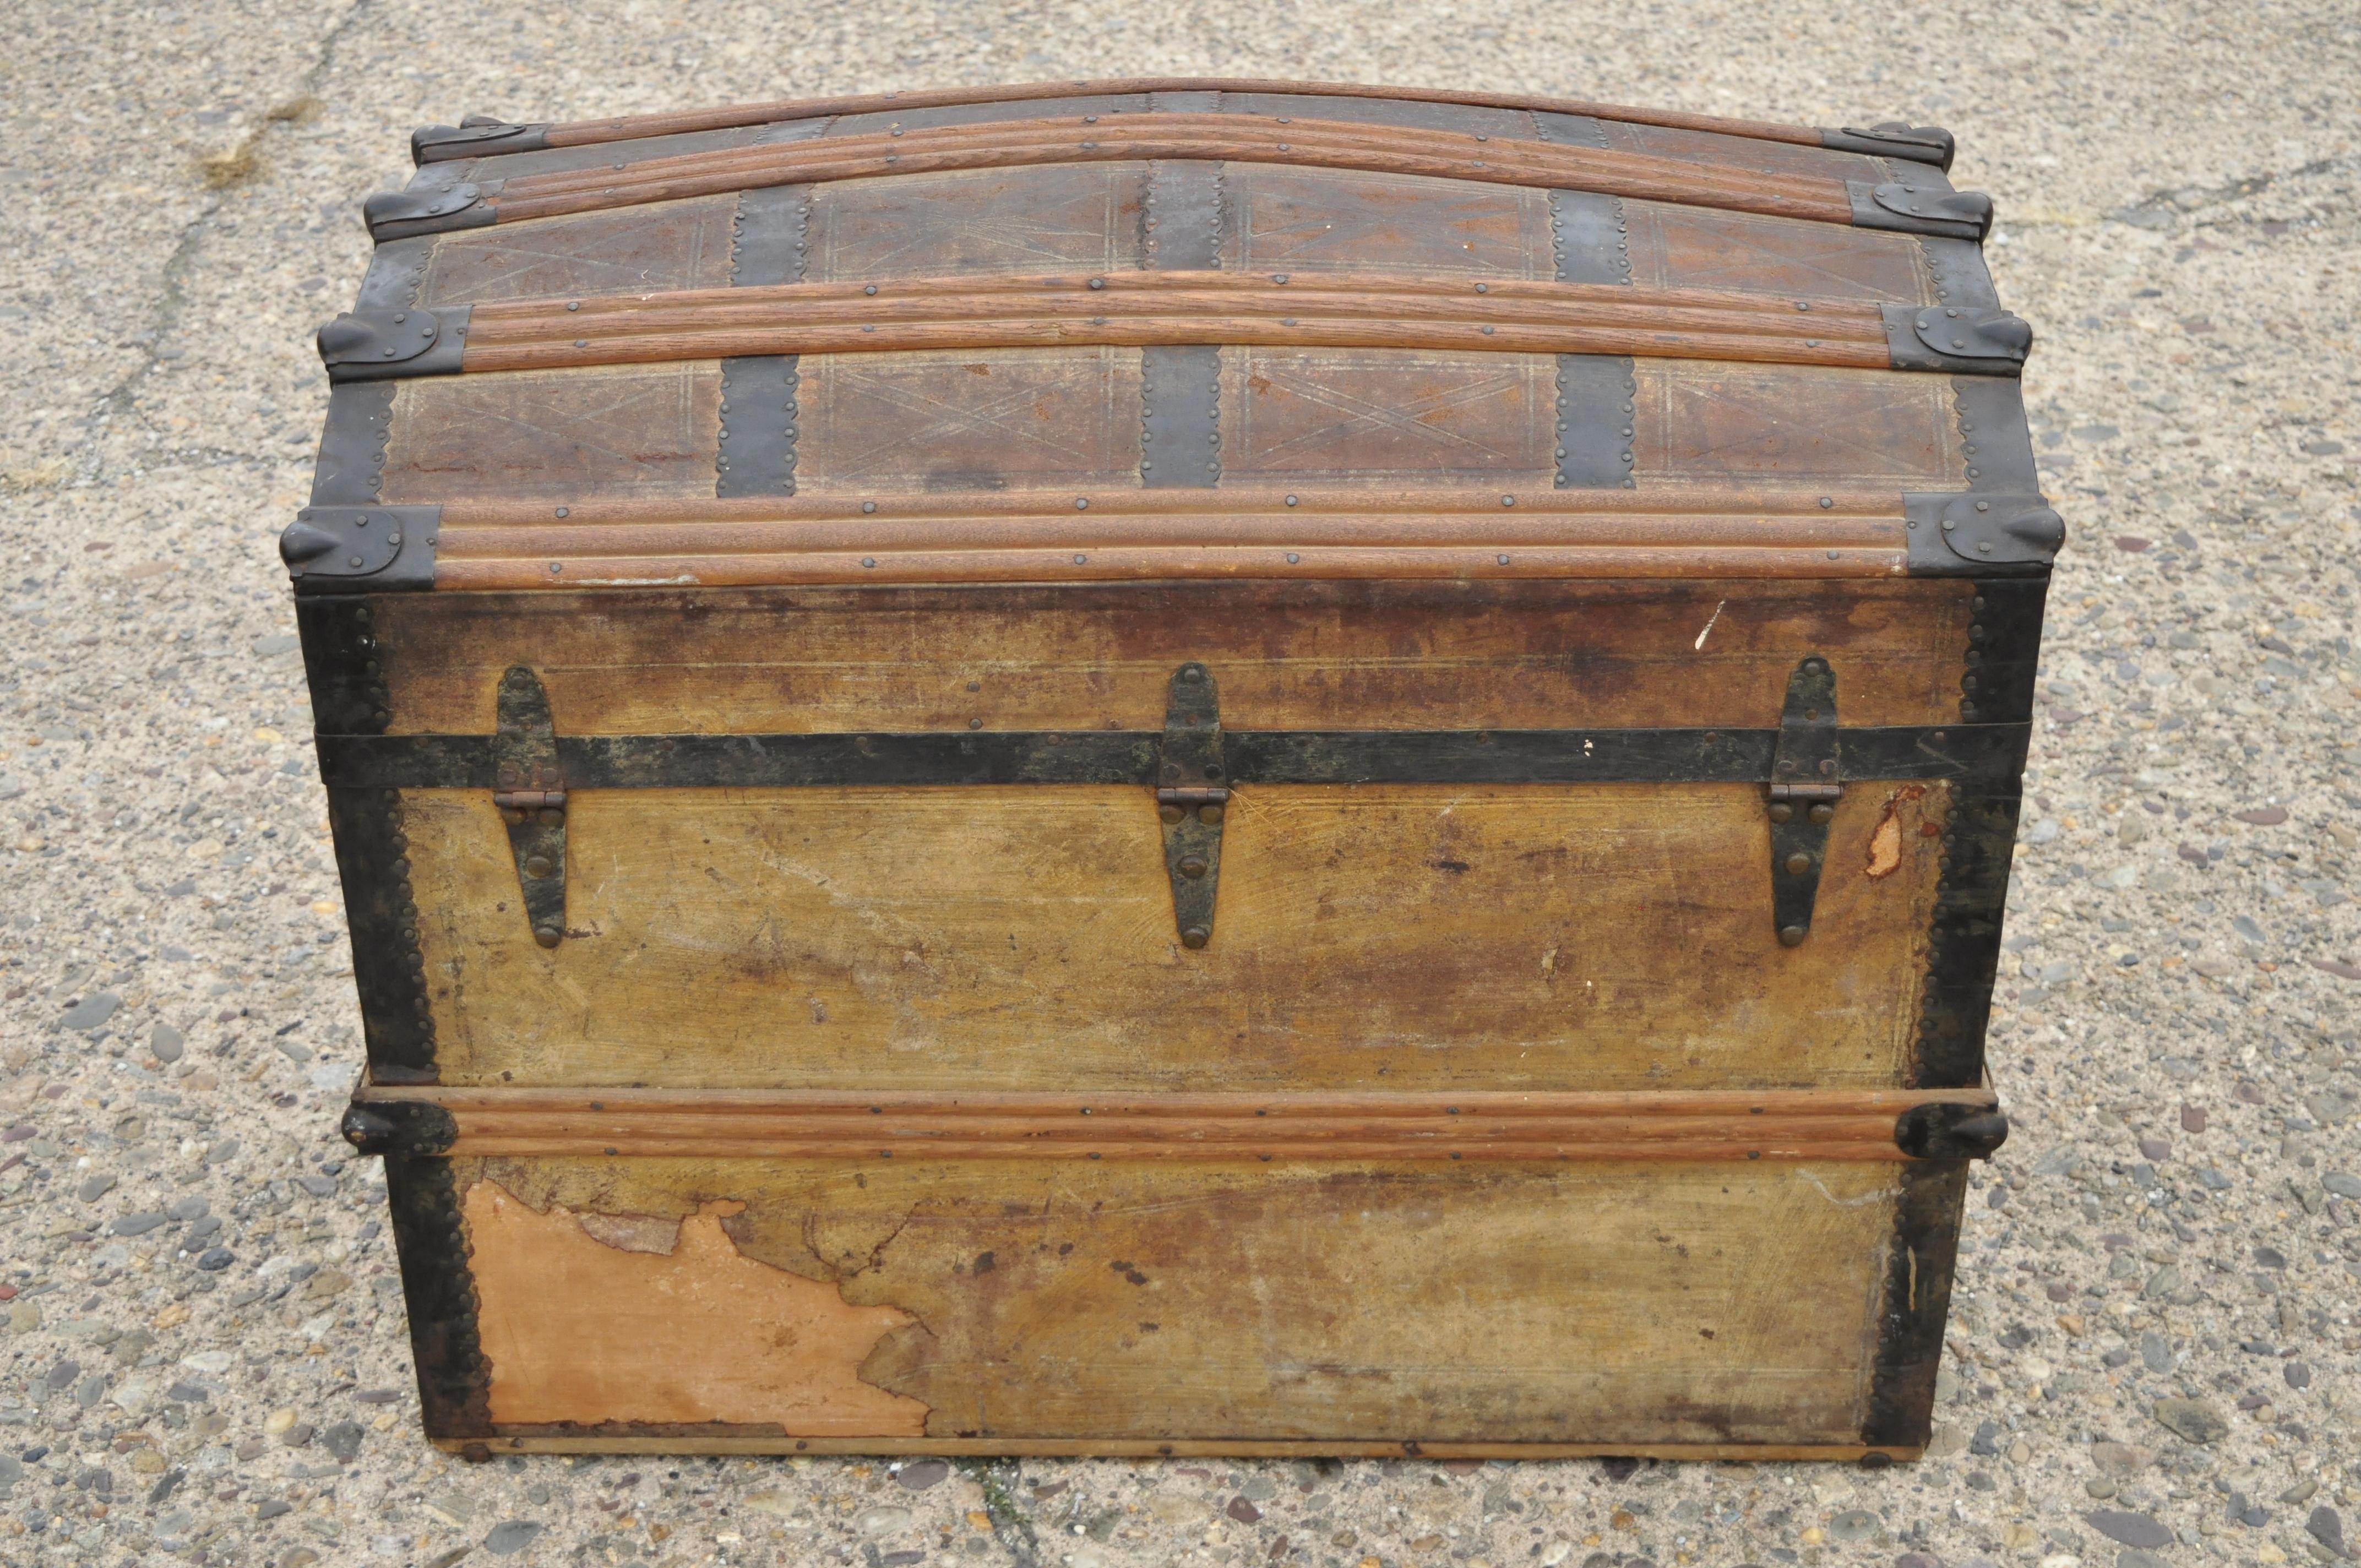 Antique Dome Top Wood Leather Metal Distressed Pirates Treasure Chest Trunk 1